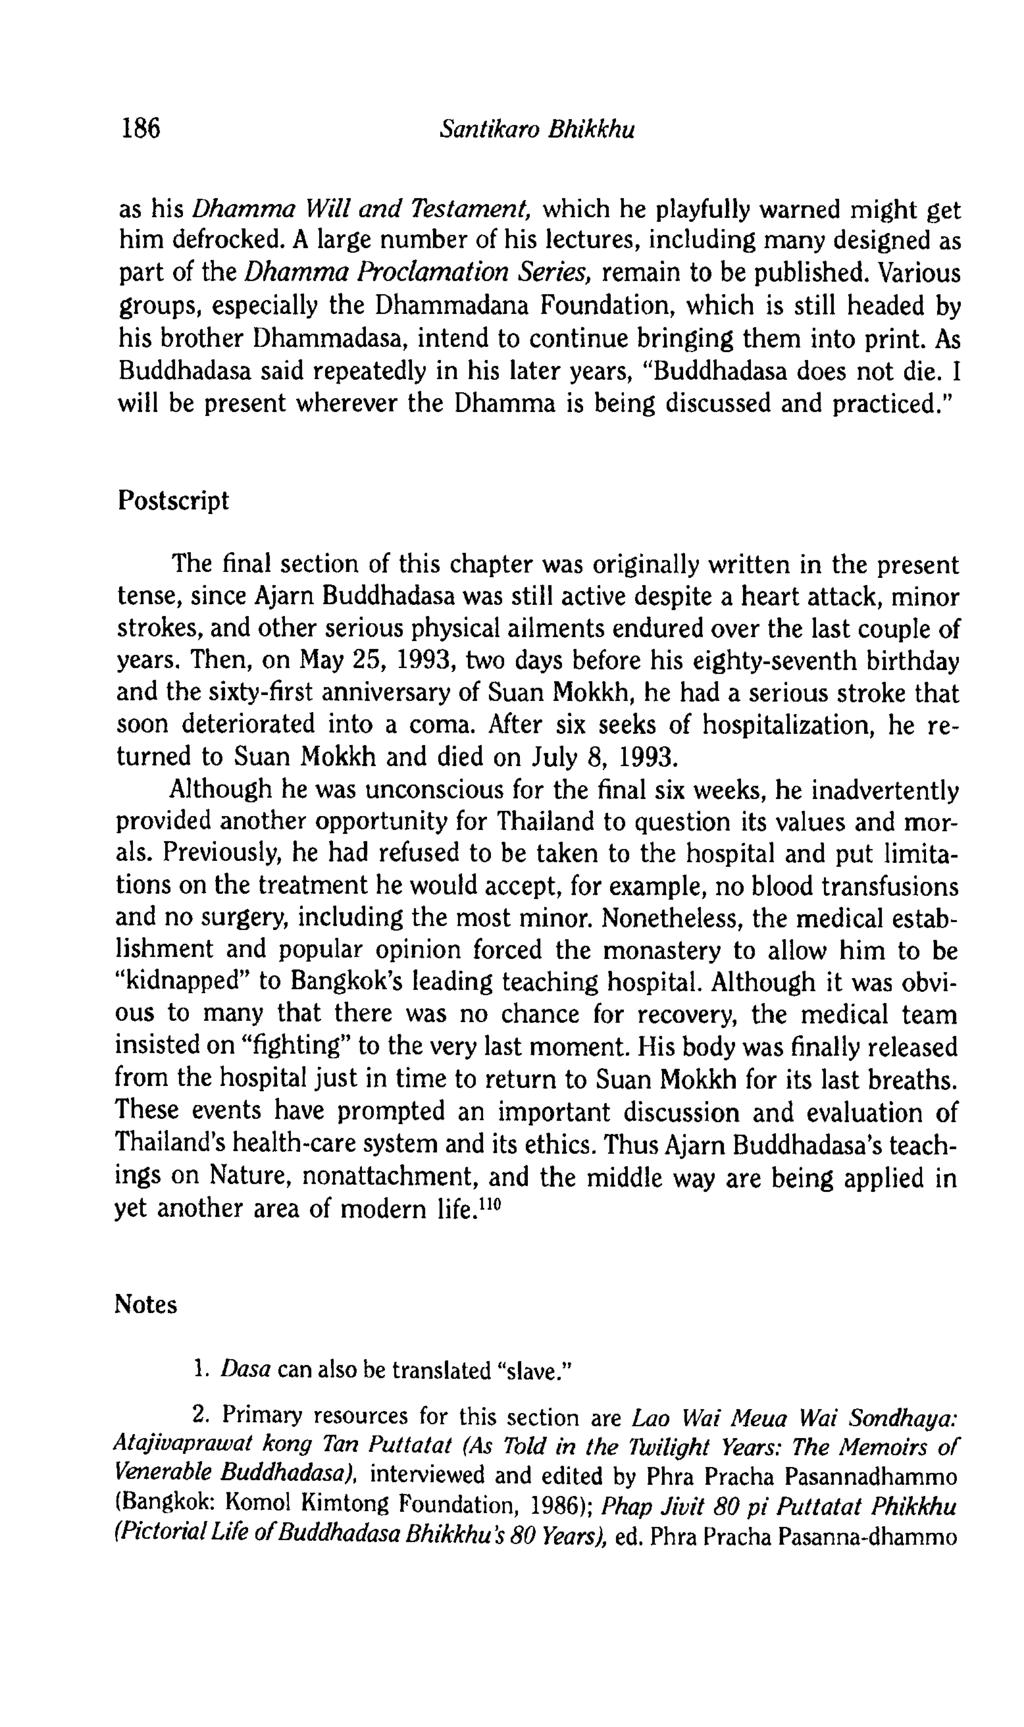 186 Santikaro Bhikkhu as his Dhamma Will and Testament, which he playfully warned might get him defrocked.